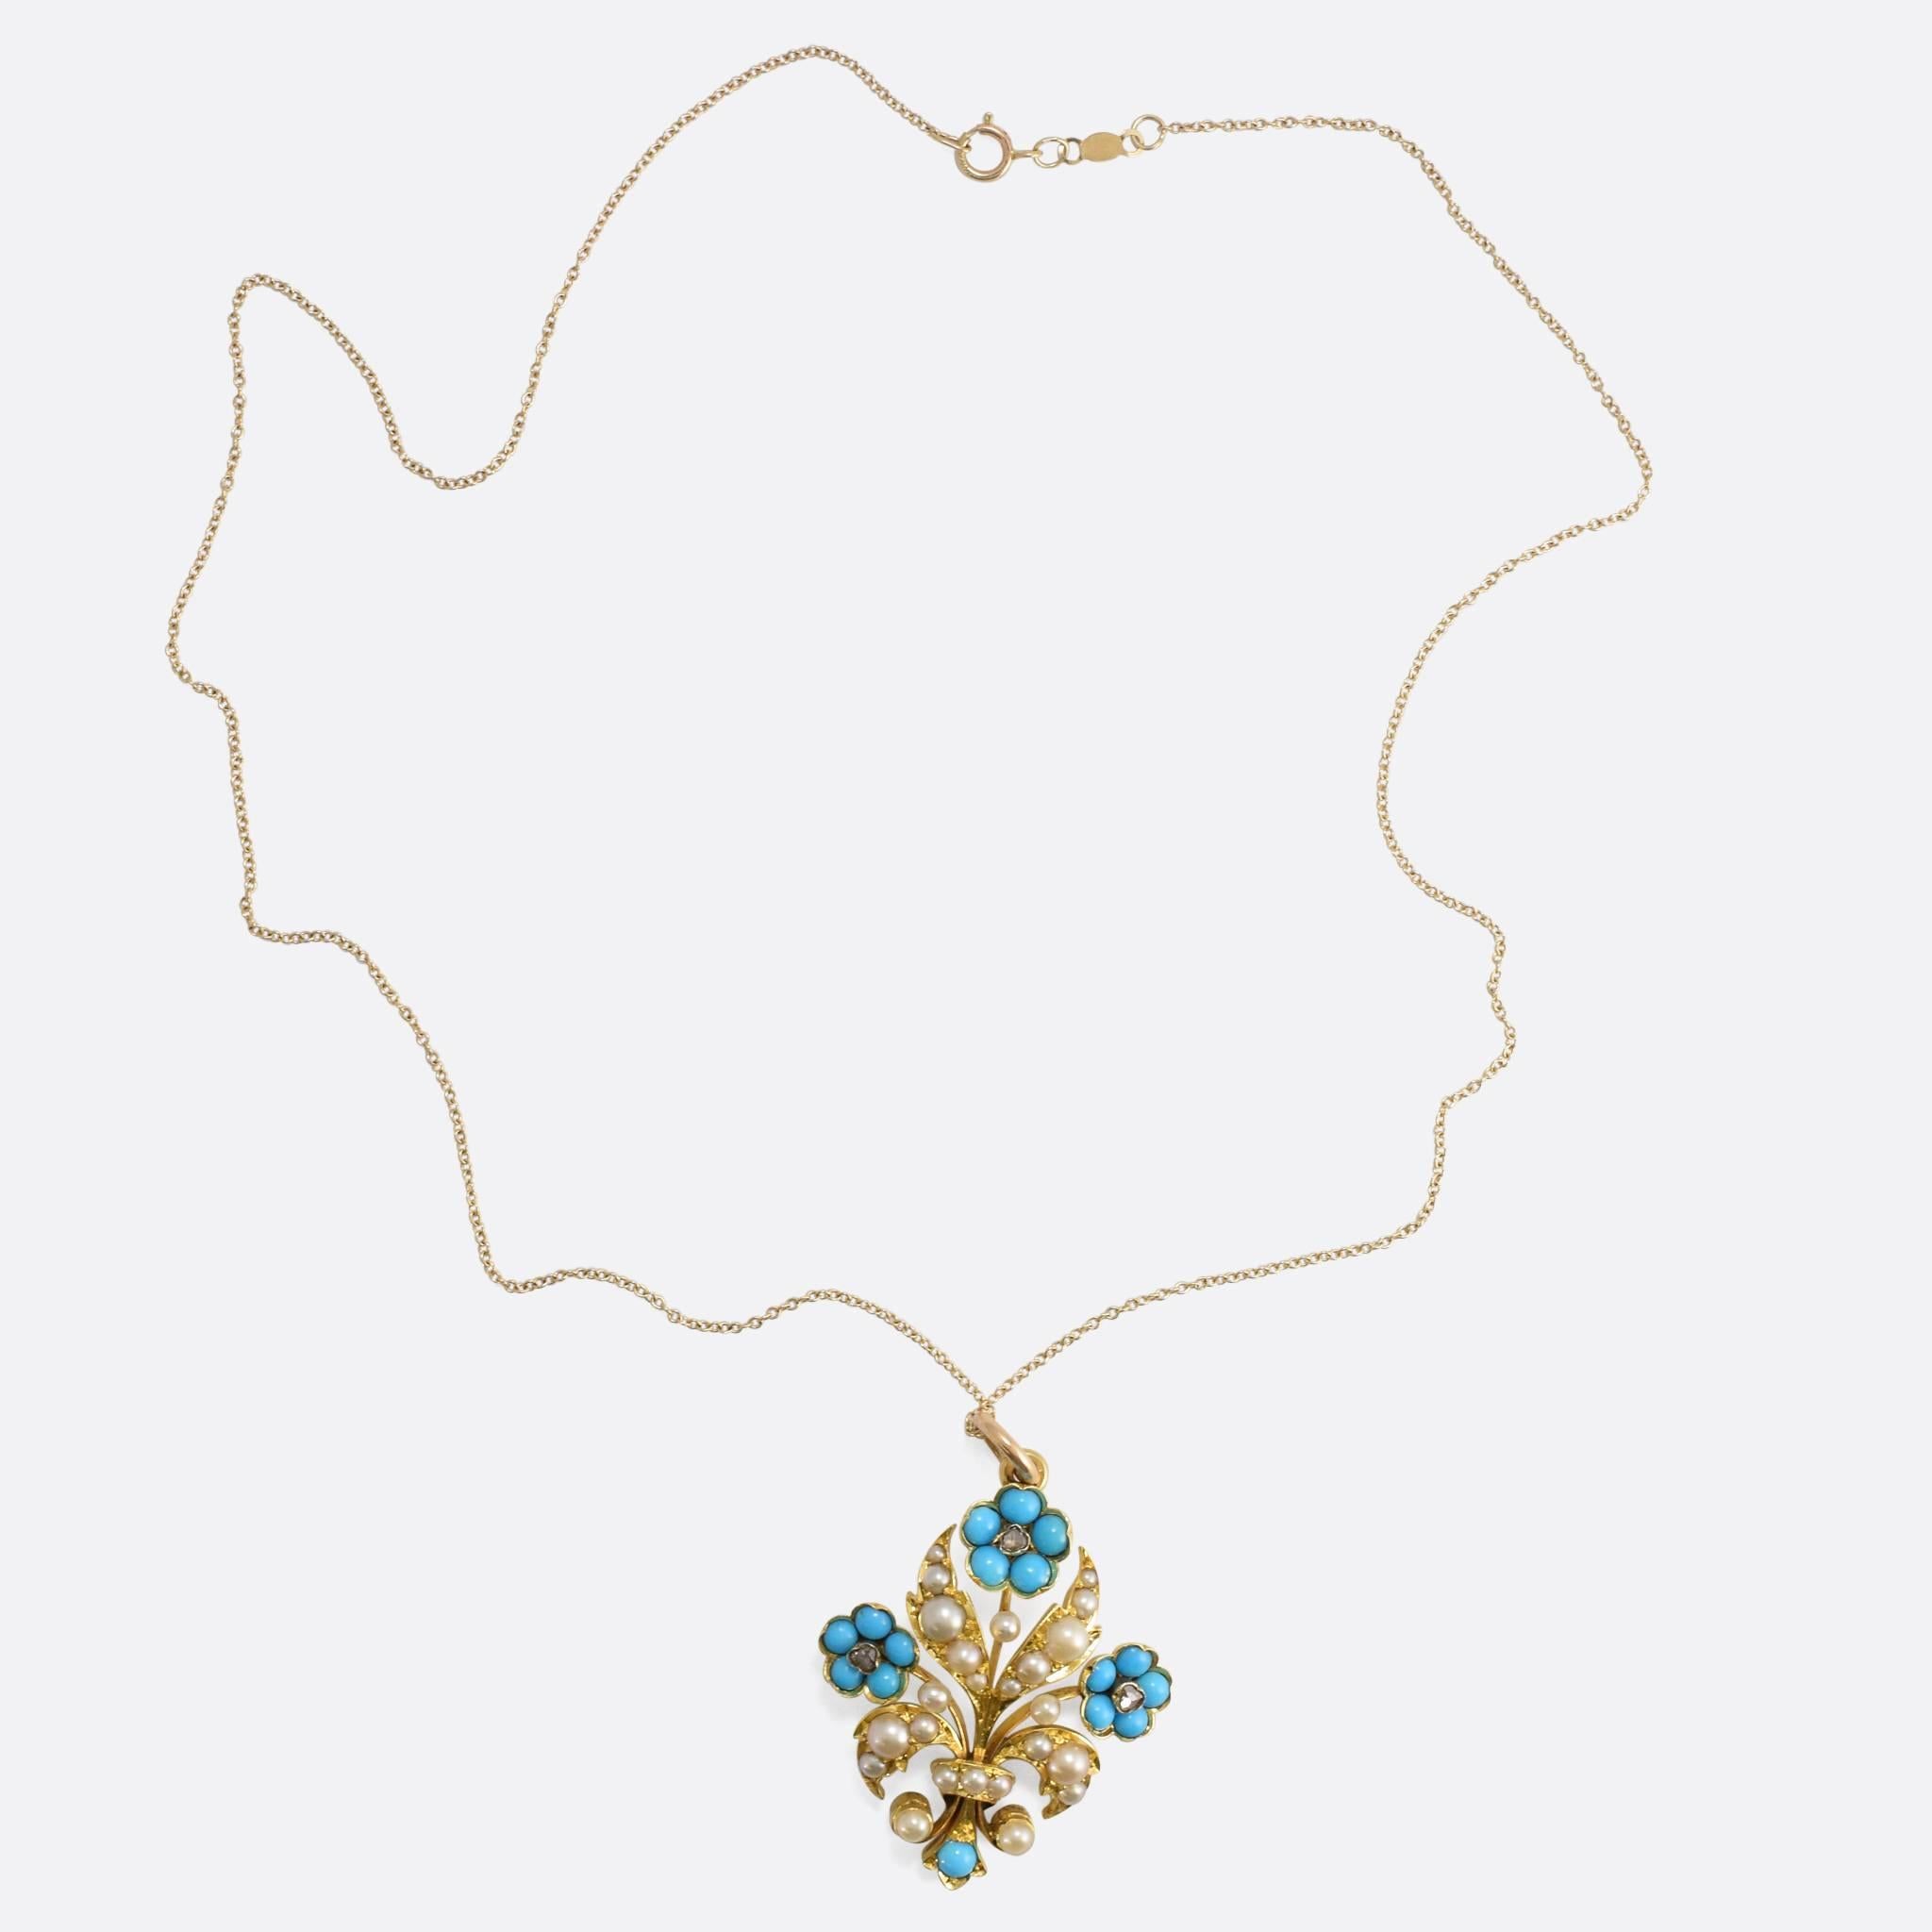 A brightly coloured 15k gold flower pendant, beautifully set with Natural split pearls, Persian turquoise cabochons and rose cut diamonds. A particularly good quality example, with pendant fittings for wear on a light chain / necklace. 